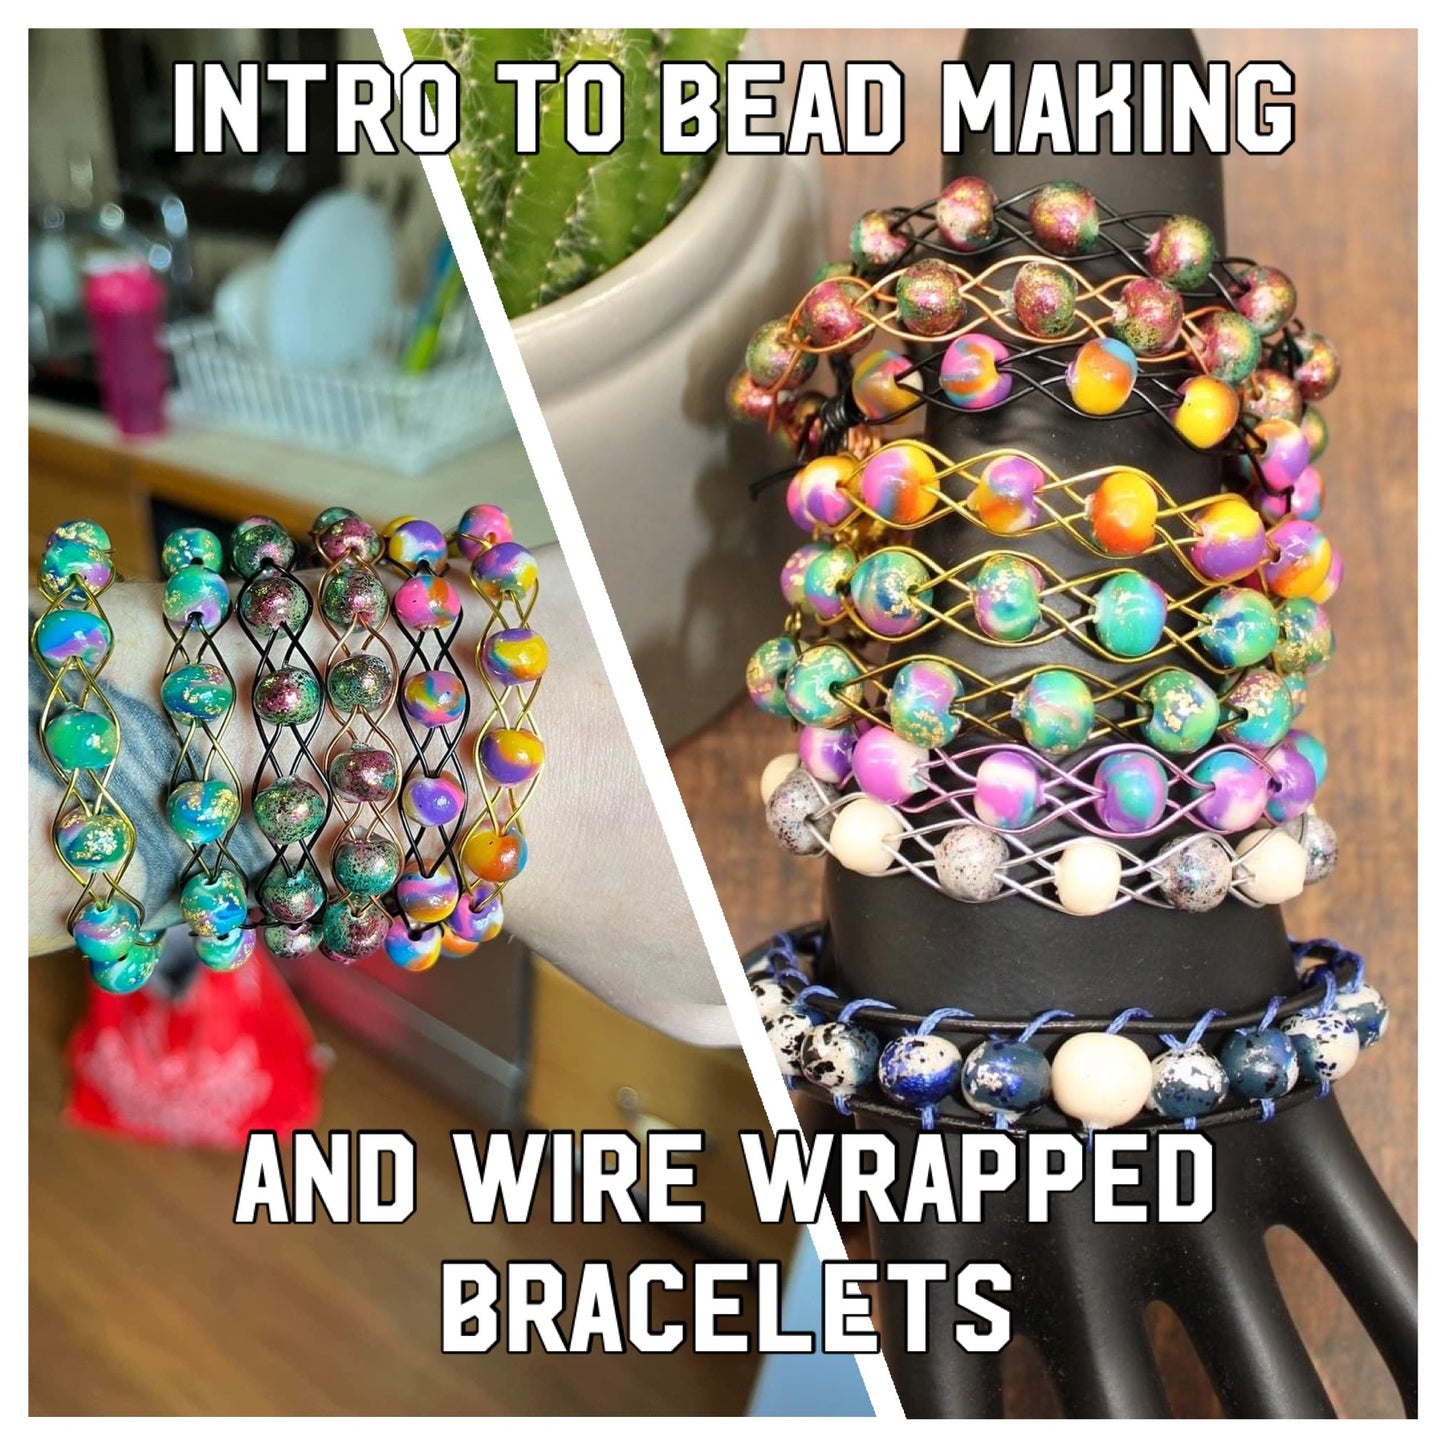 Sept 2022 Class - Intro to Bead Making and Wire Wrapped Bracelets